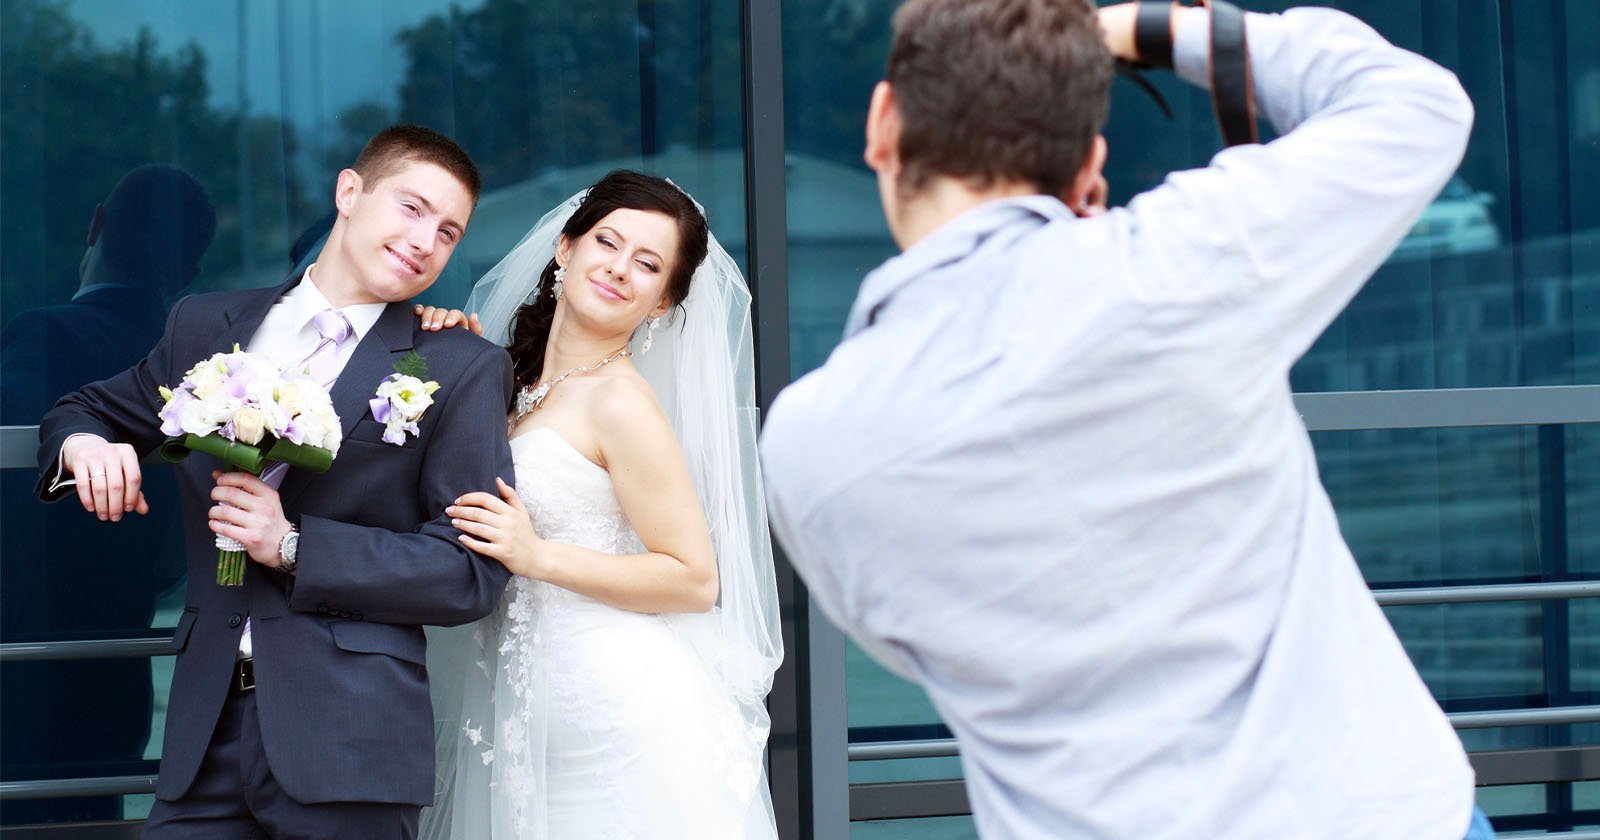  photographer tells couple lost wedding photos then disappears 